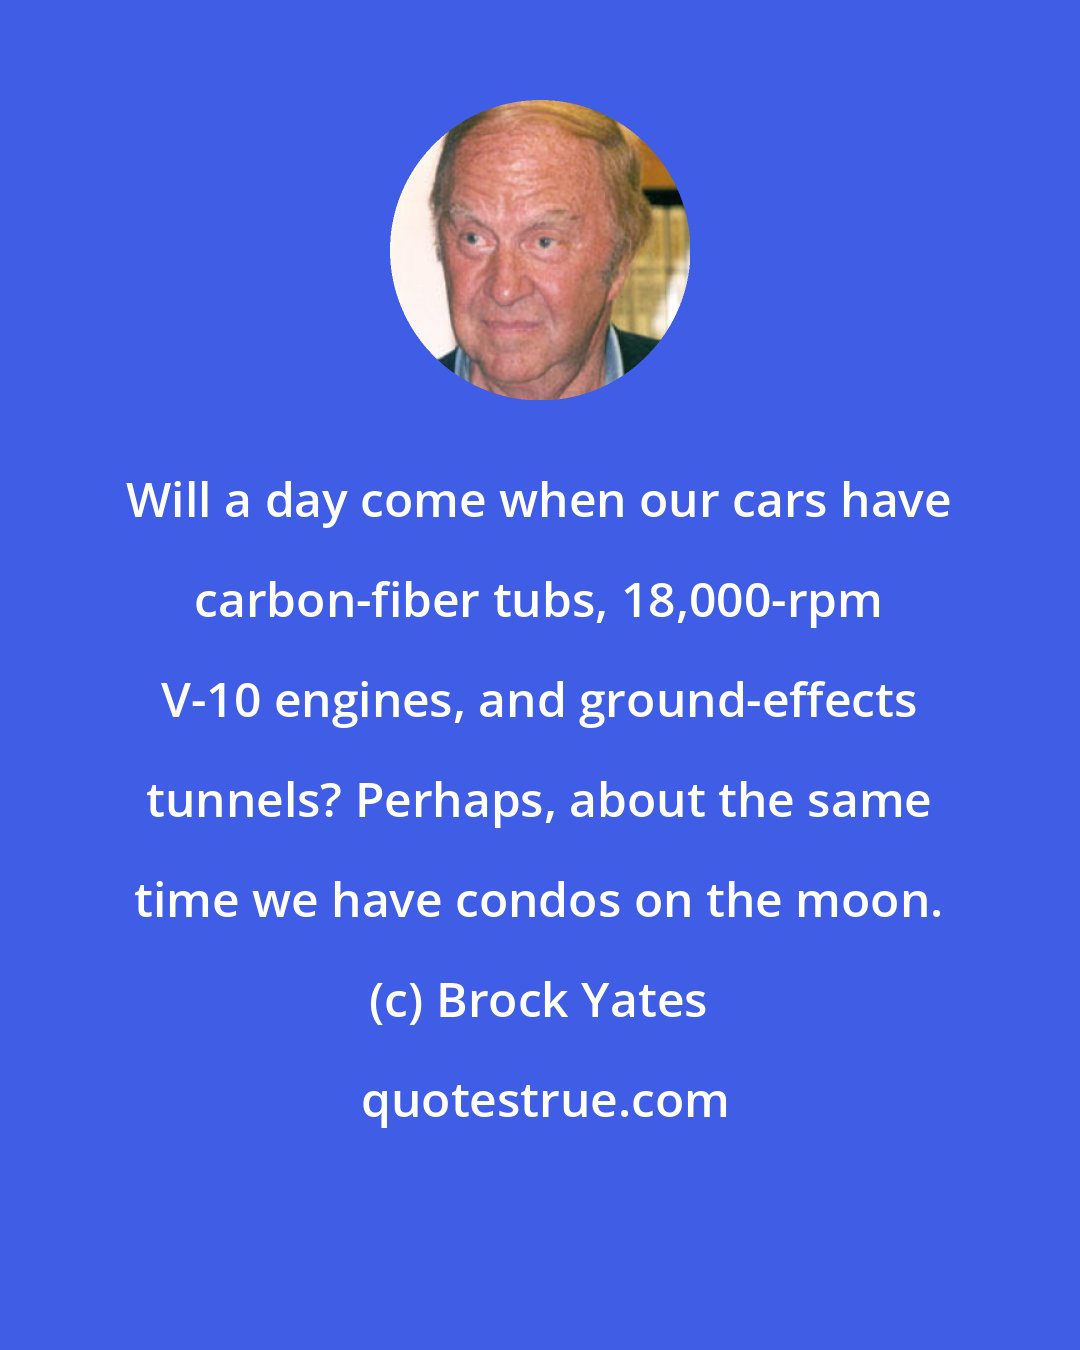 Brock Yates: Will a day come when our cars have carbon-fiber tubs, 18,000-rpm V-10 engines, and ground-effects tunnels? Perhaps, about the same time we have condos on the moon.